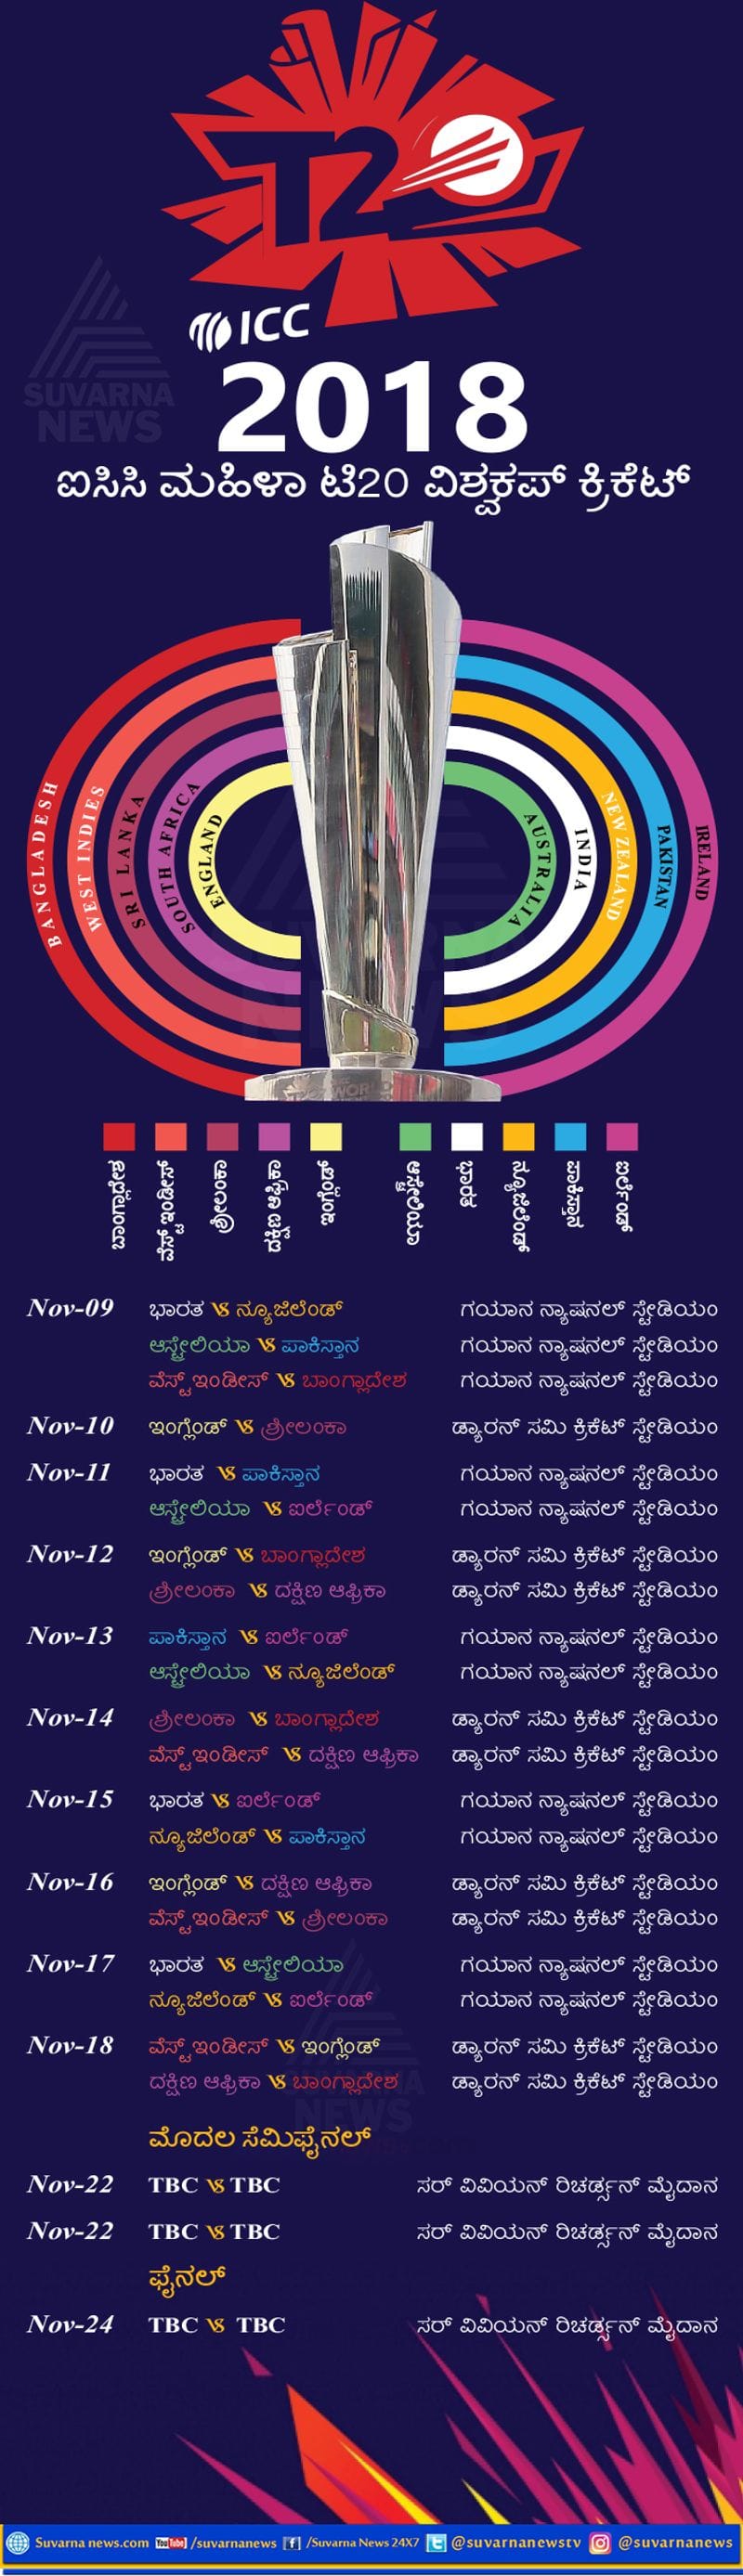 ICC Woman's T20 World Cup 2018 Full Schedule